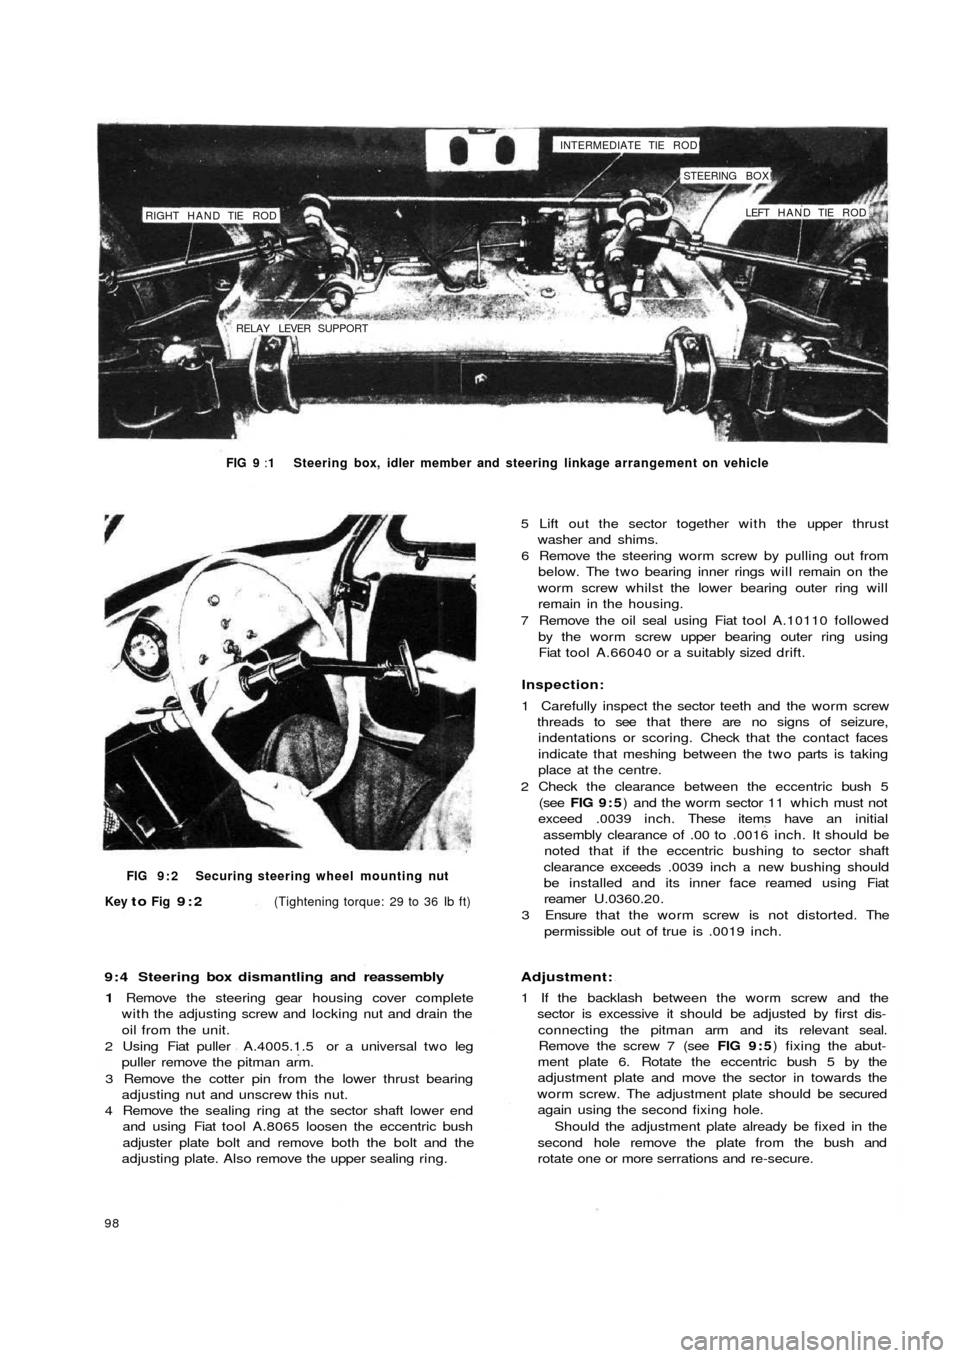 FIAT 500 1964 1.G Workshop Manual RIGHT HAND TIE  ROD
RELAY LEVER  SUPPORTINTERMEDIATE TIE ROD!
STEERING BOX!
LEFT  HAND TIE  ROD
FIG 9 :1 Steering box, idler member and steering linkage arrangement on vehicle
FIG 9 : 2  Securing stee